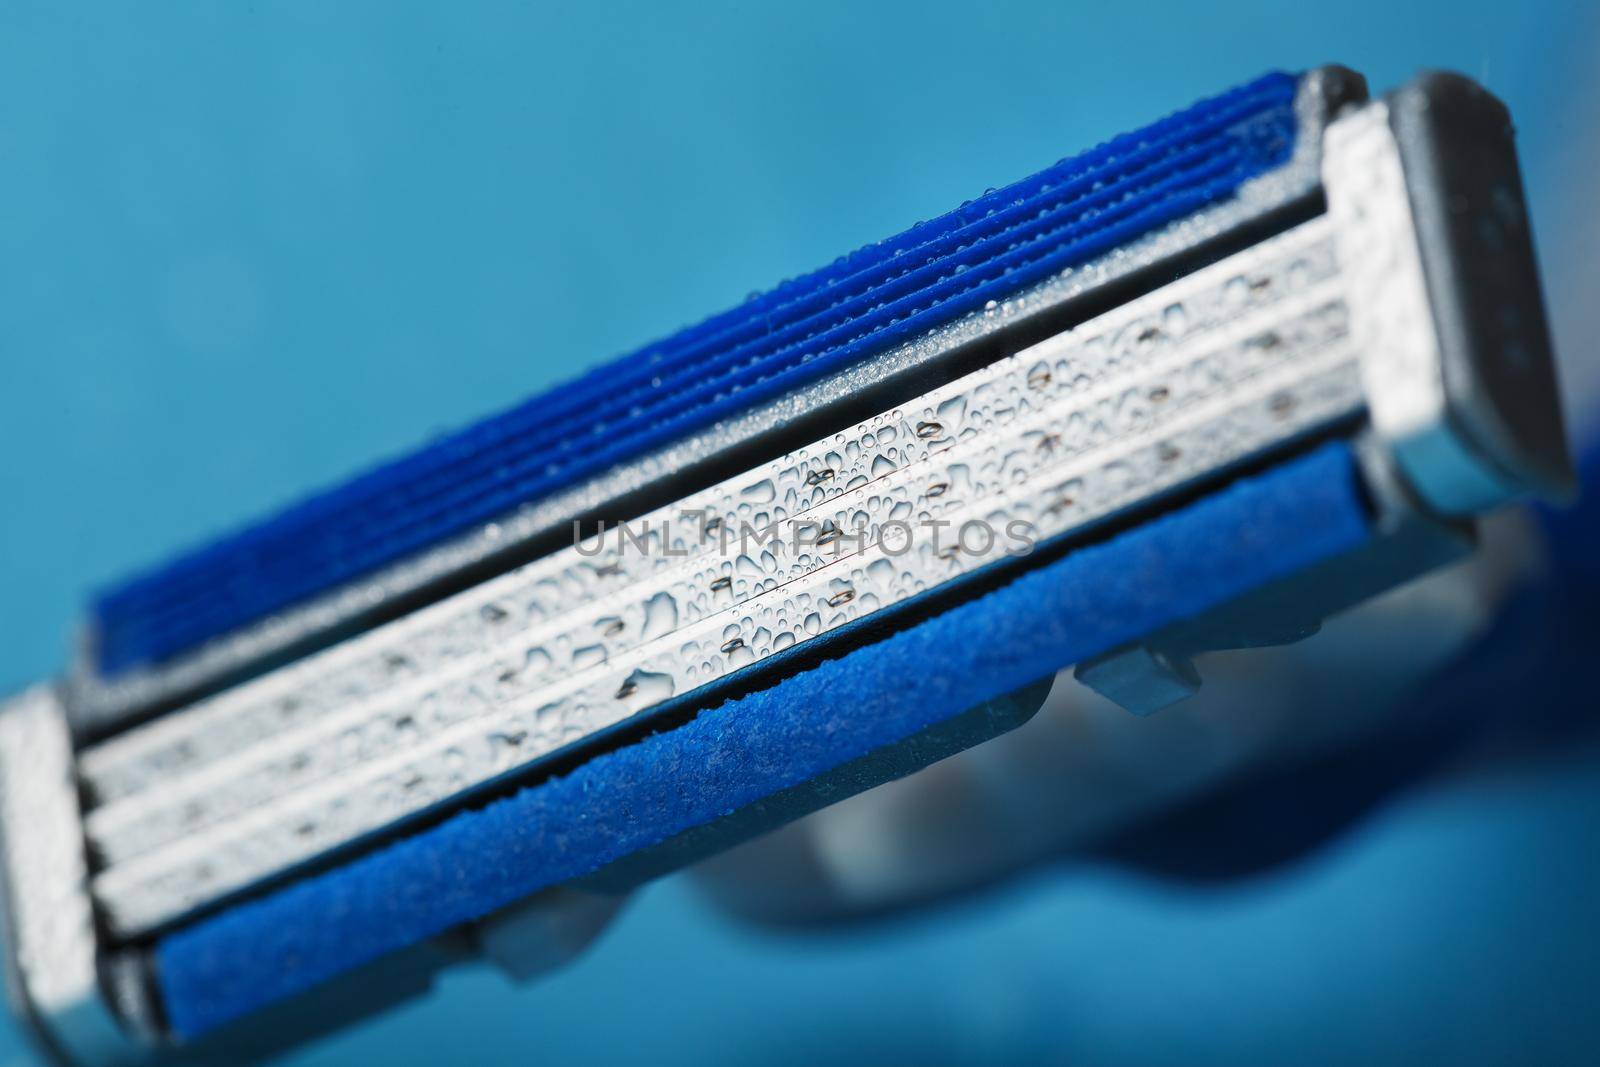 Razor blades on a blue background with drops of icy water close-up free space. The concept of purity and freshness